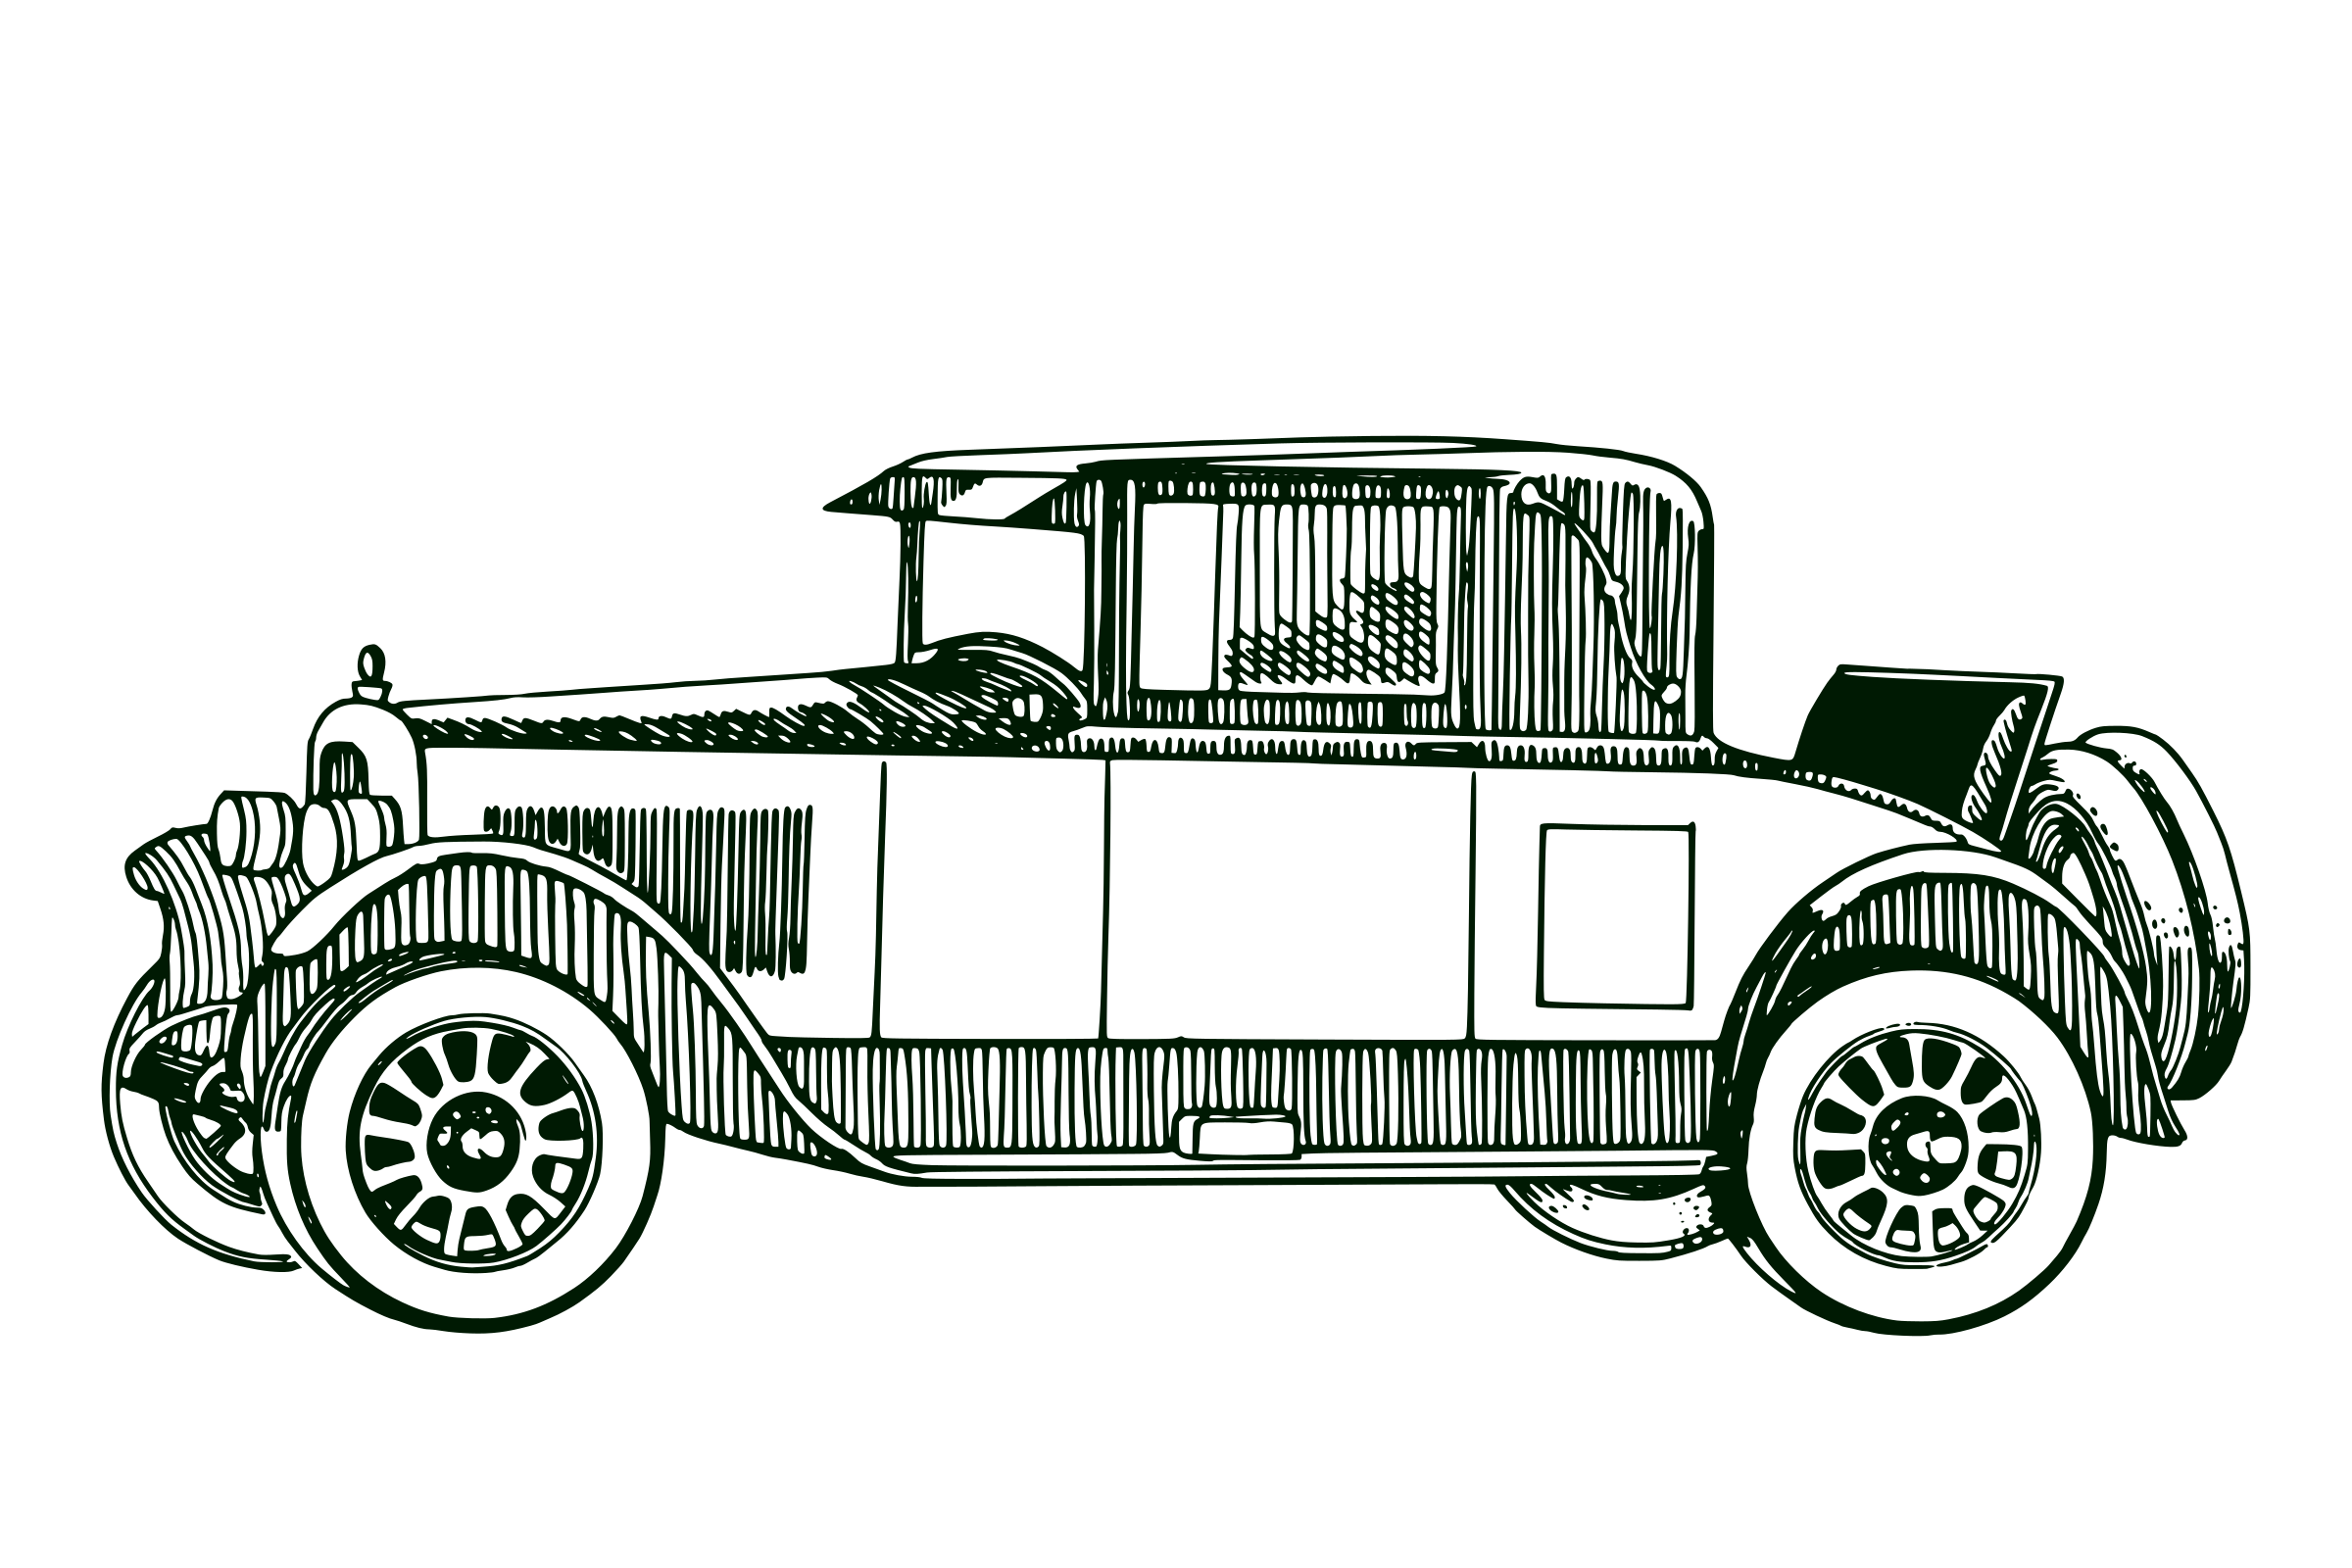 Clipart Cars Vintage Clipart Cars Vintage Transparent Free For